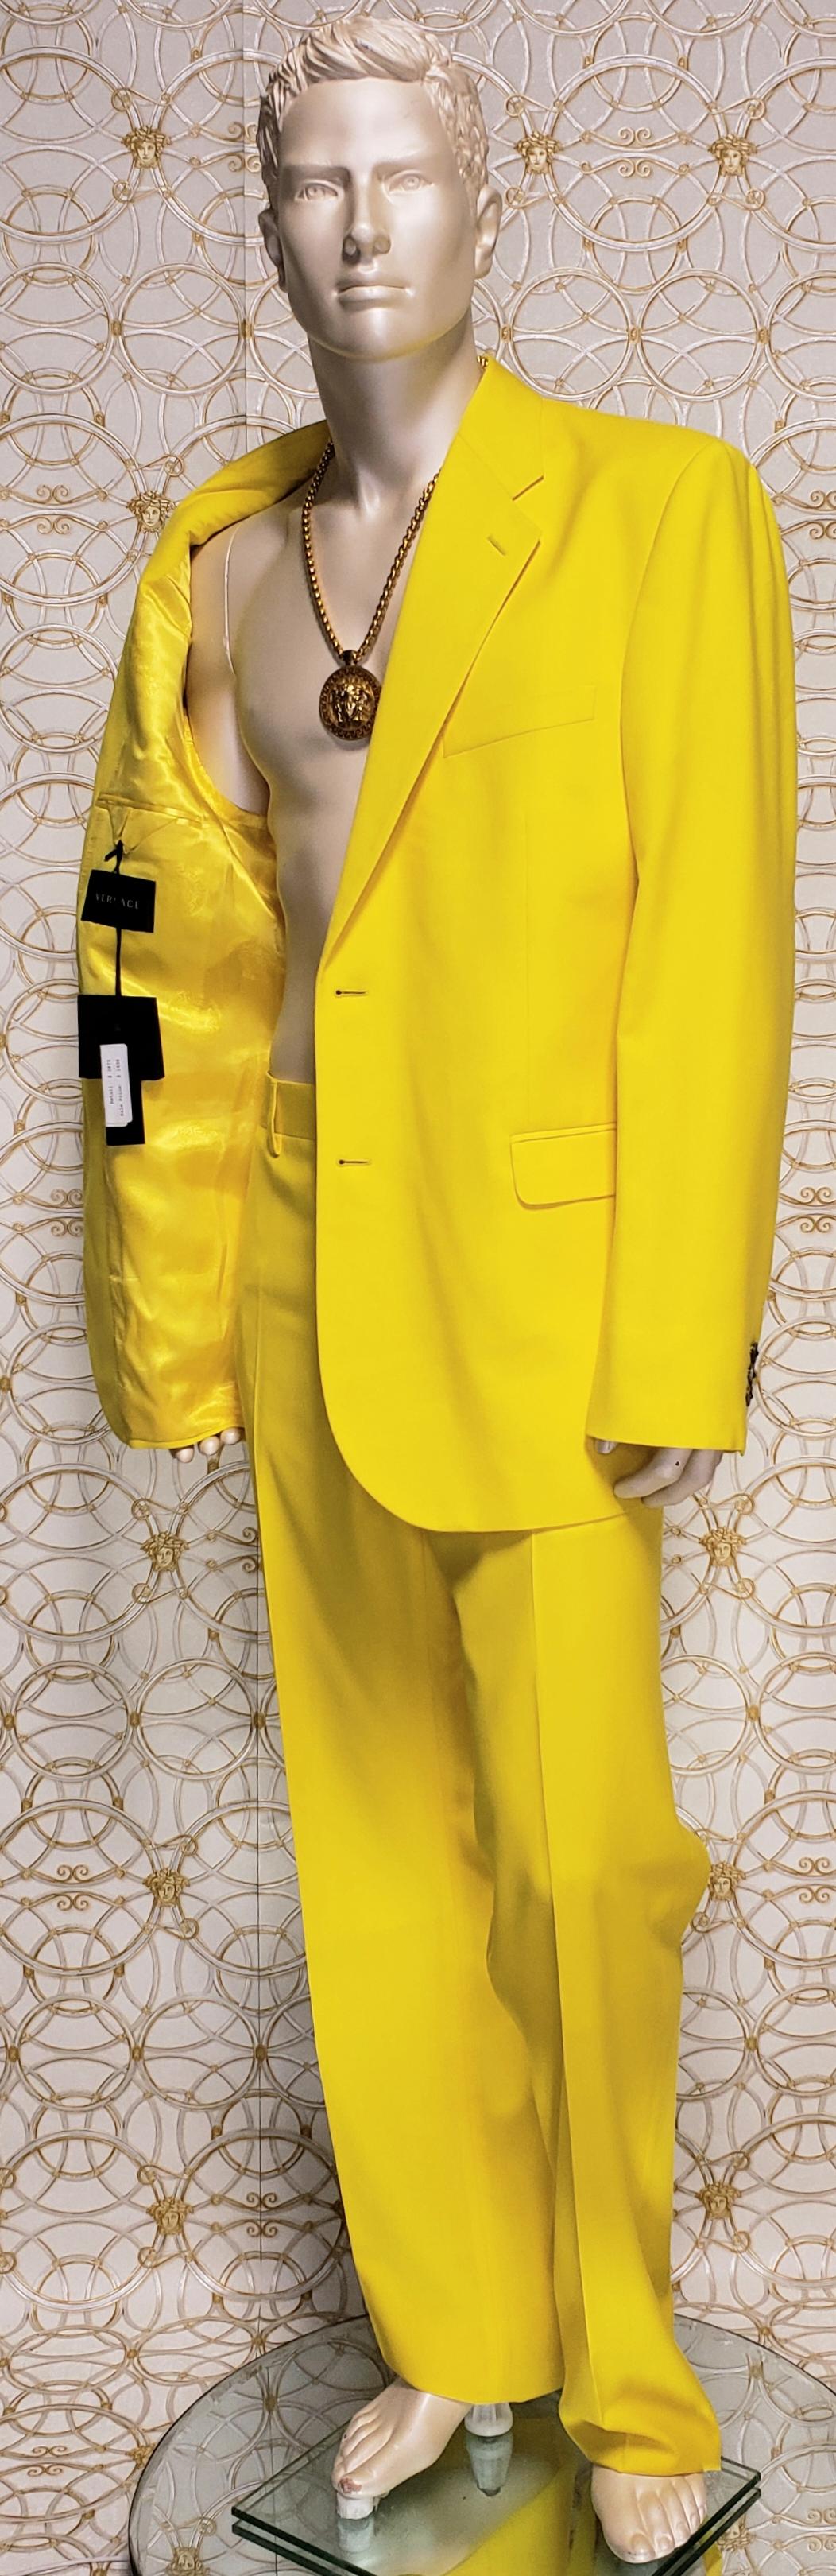 Men's VERSACE YELLOW TAILOR MADE 2pc SUIT 58 - 48 (4XL) For Sale